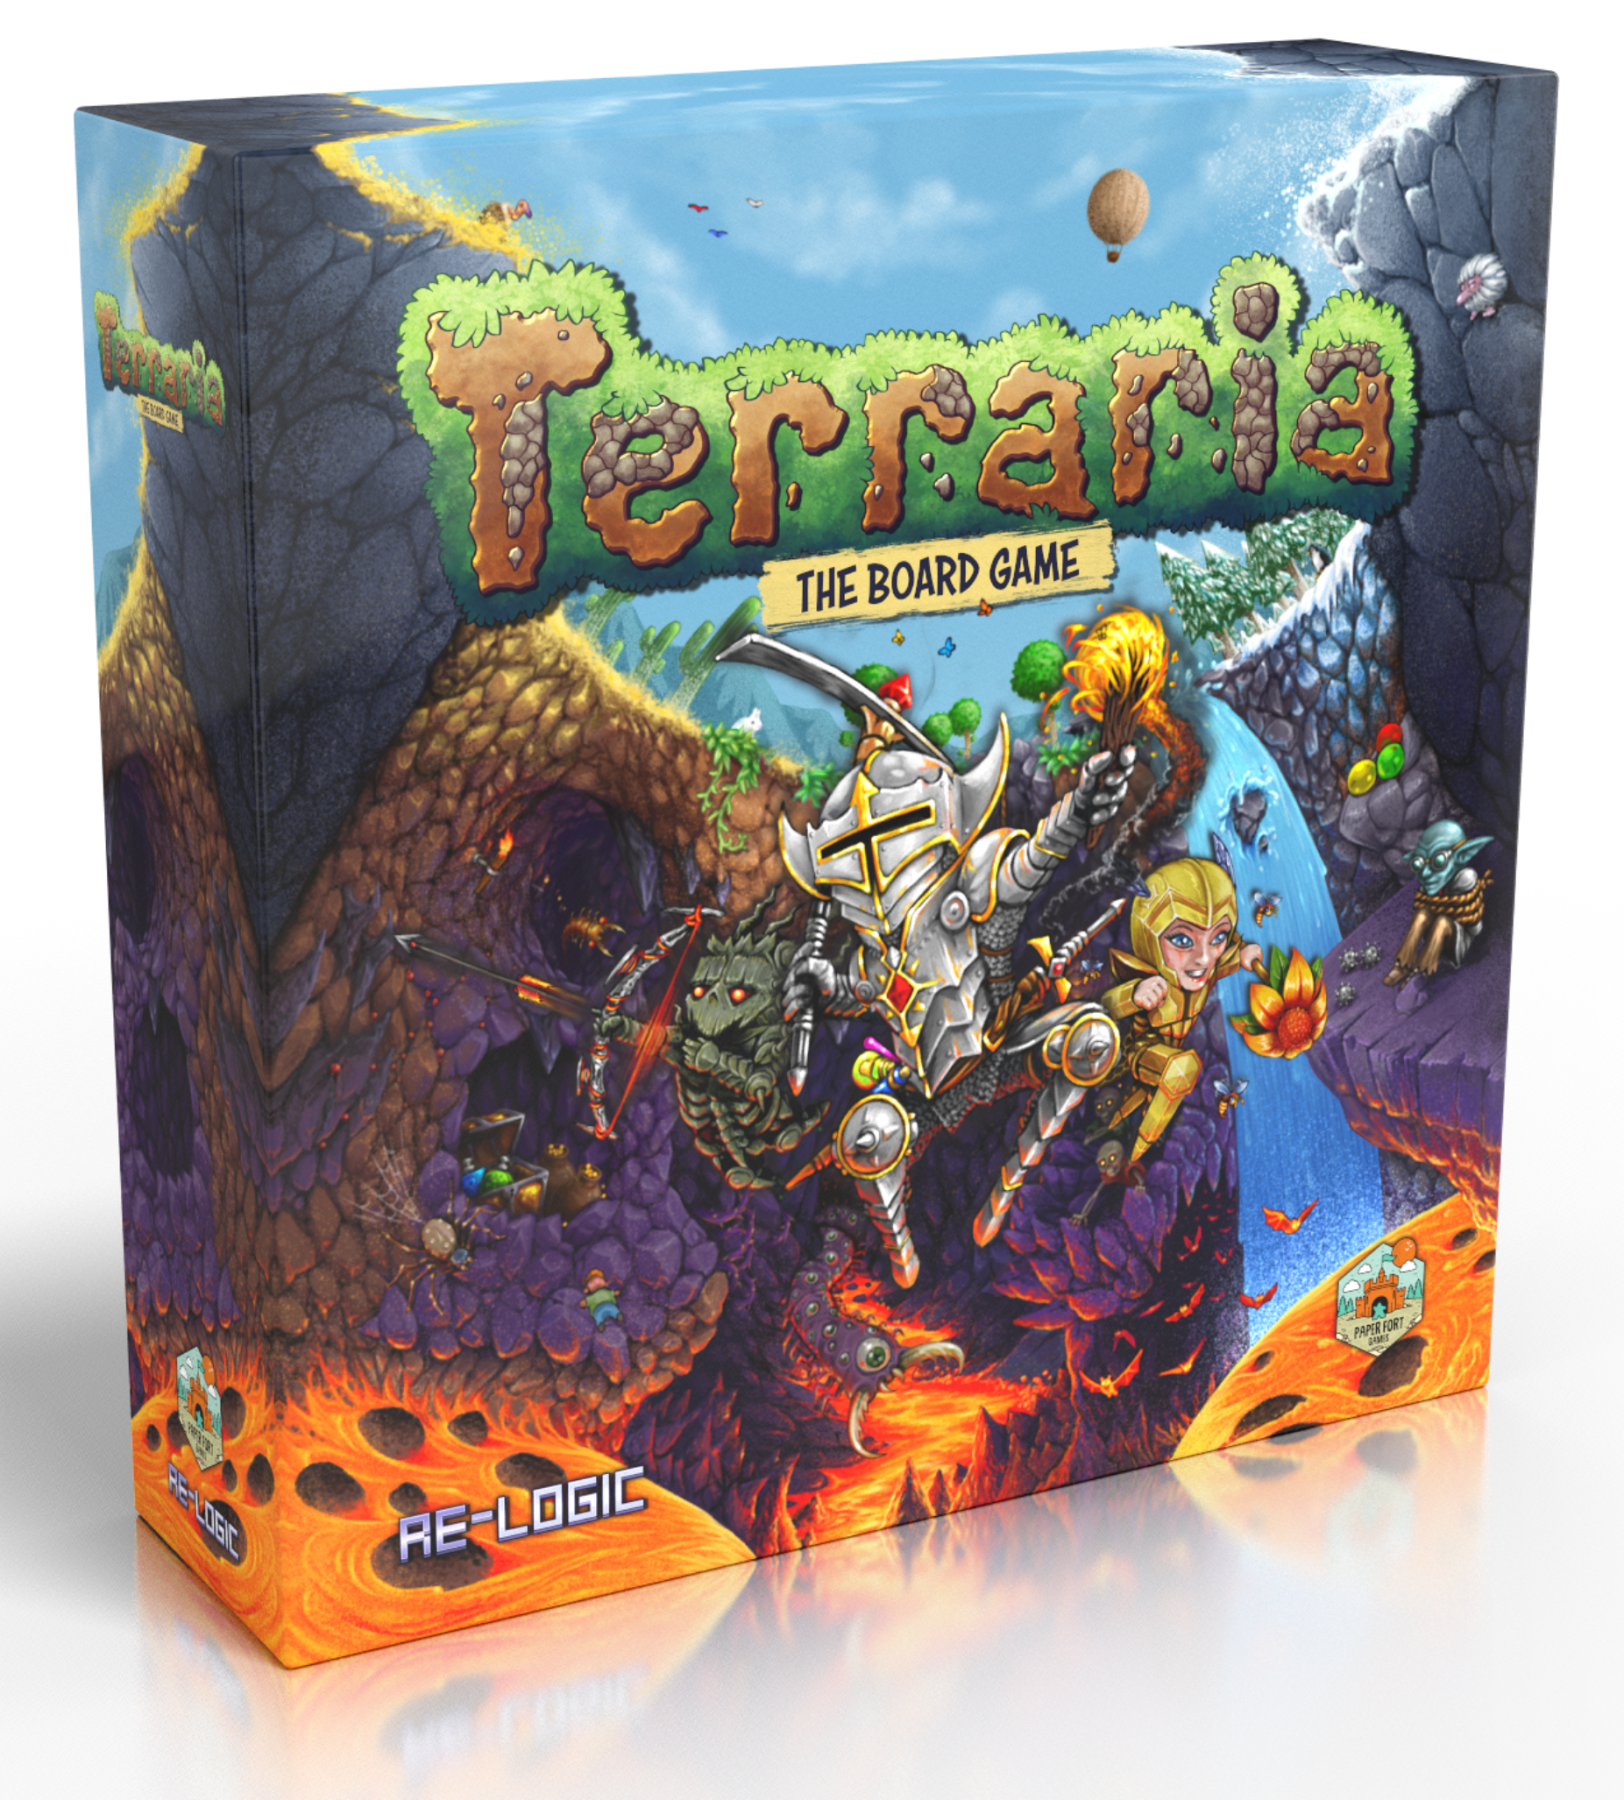 Re-Logic Confirms It Is Working on the Cross-Play Feature for Terraria